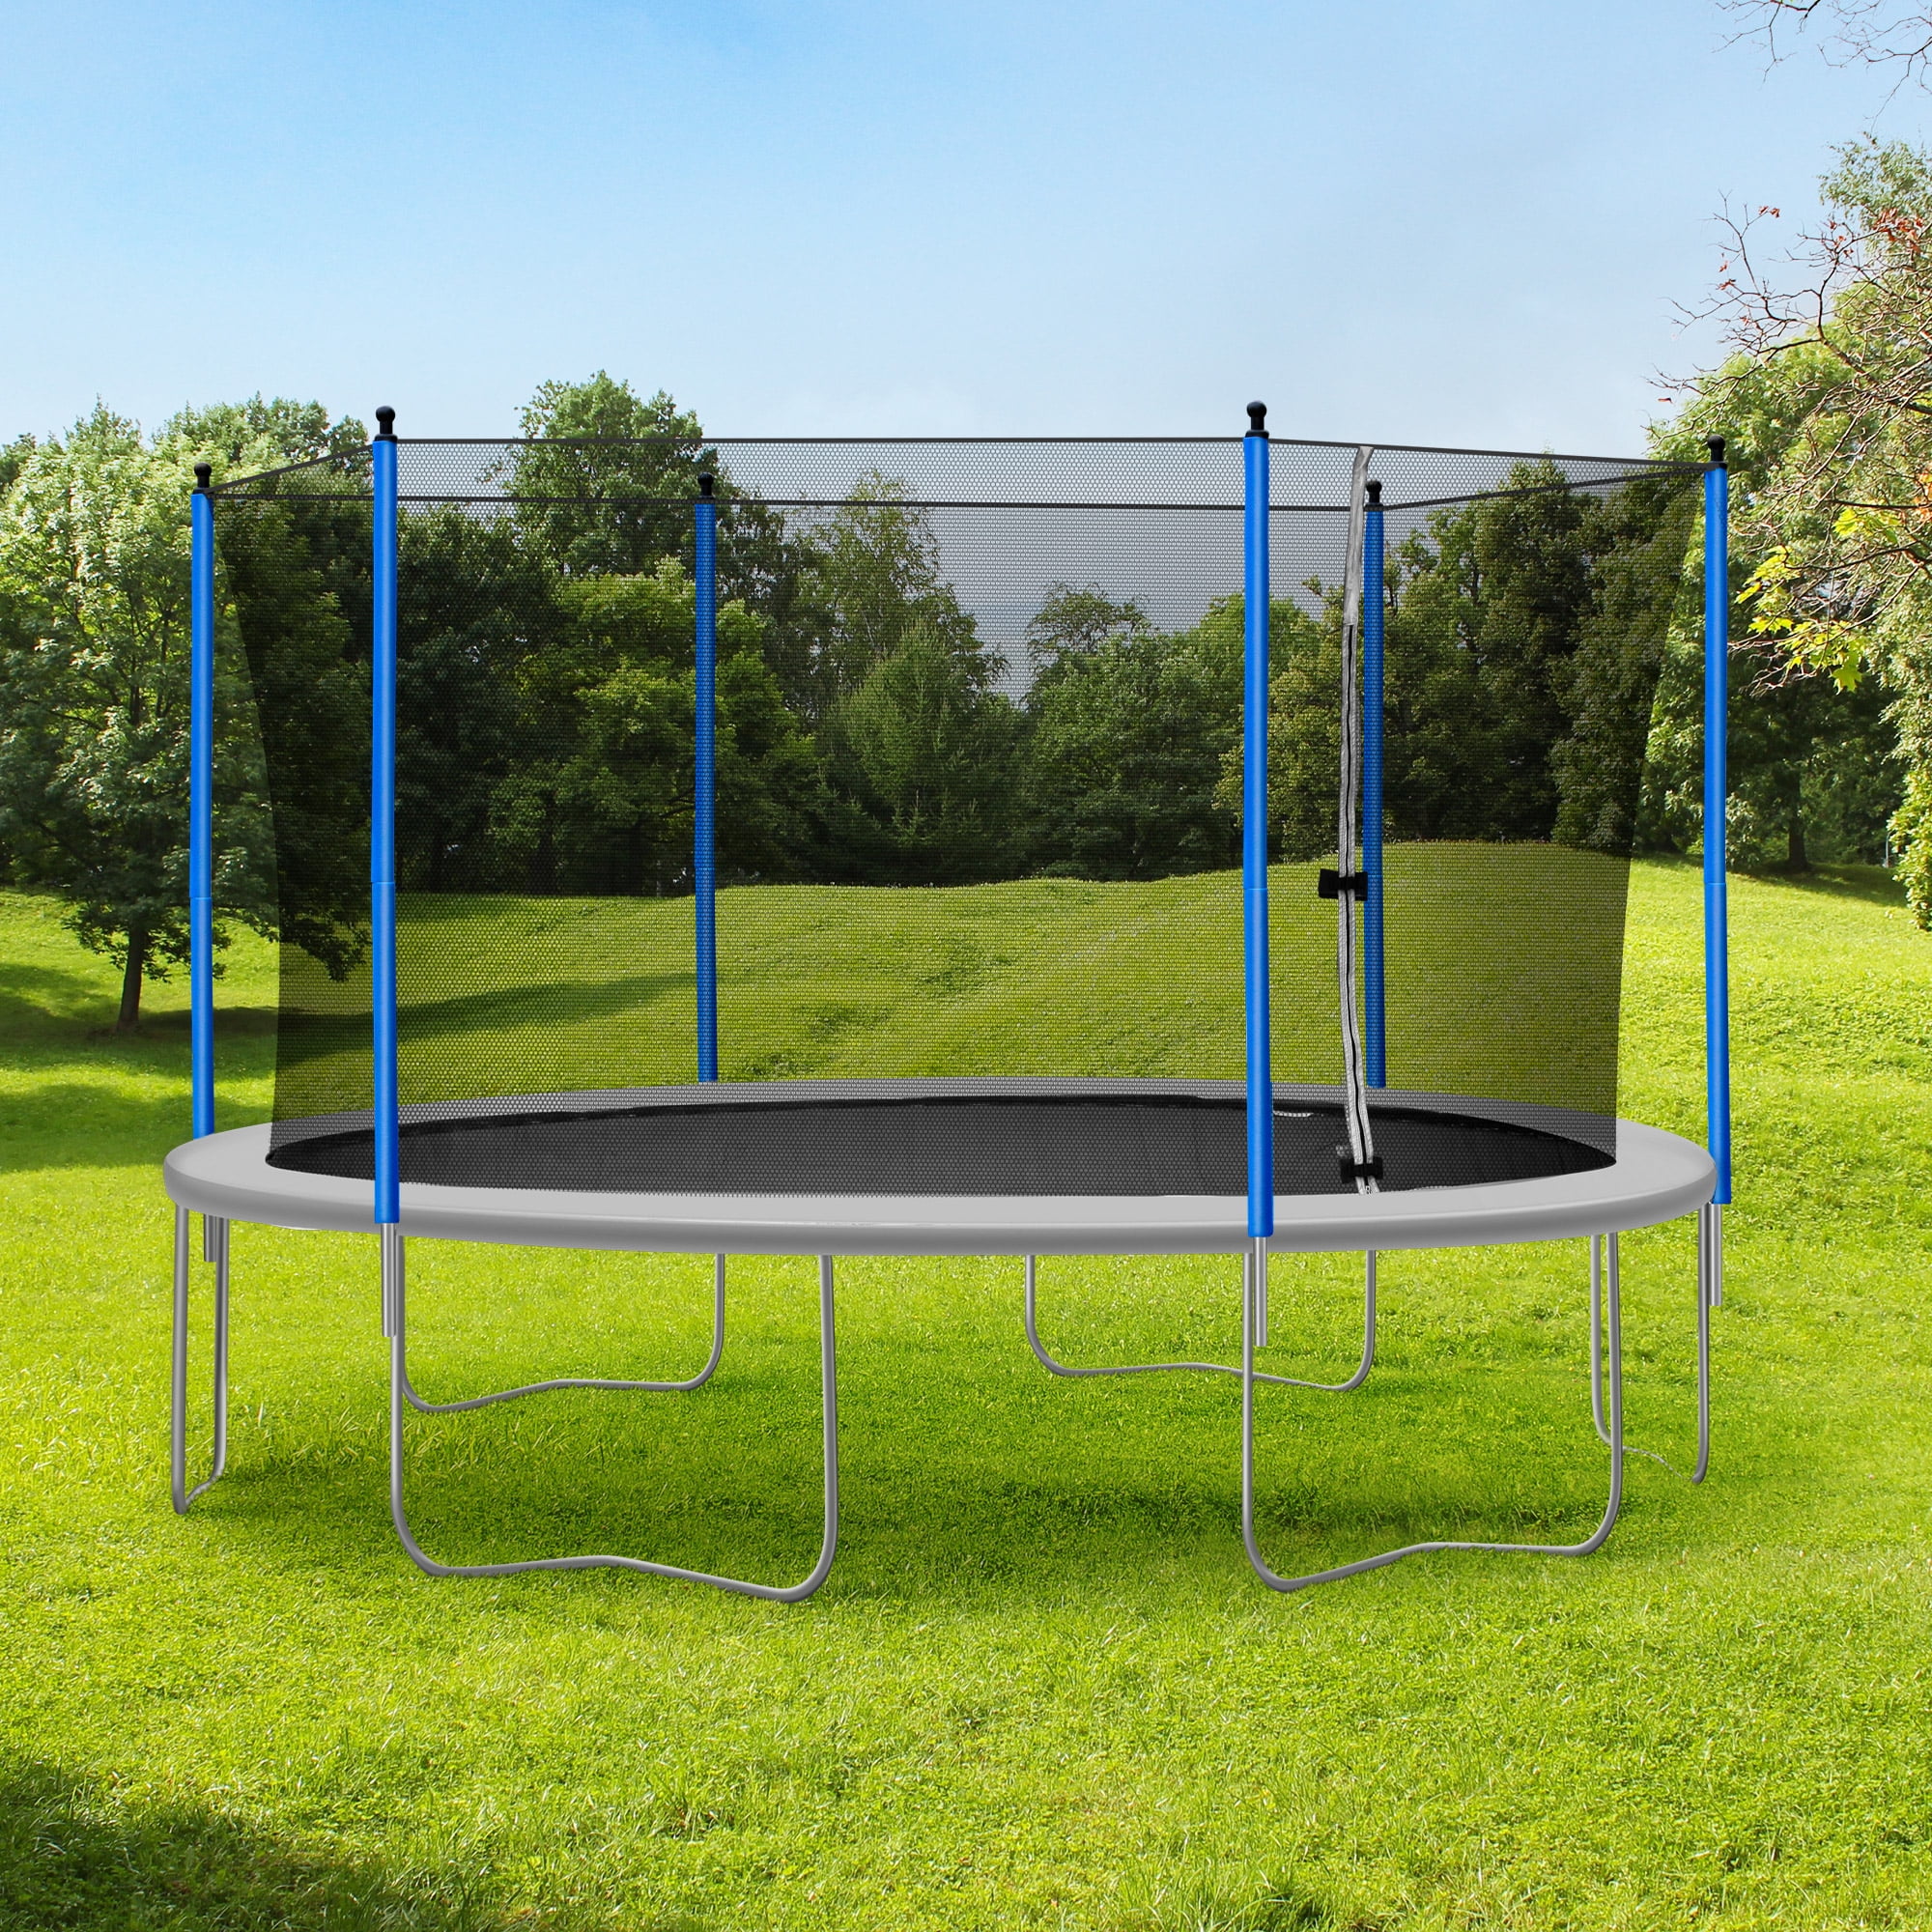 US Fast Delivered 12 FT Kids Trampoline with Enclosure Net Jumping Mat Safety Pad Ladder and Spring Cover Padding Indoor Outdoor Yard Trampolines for Children